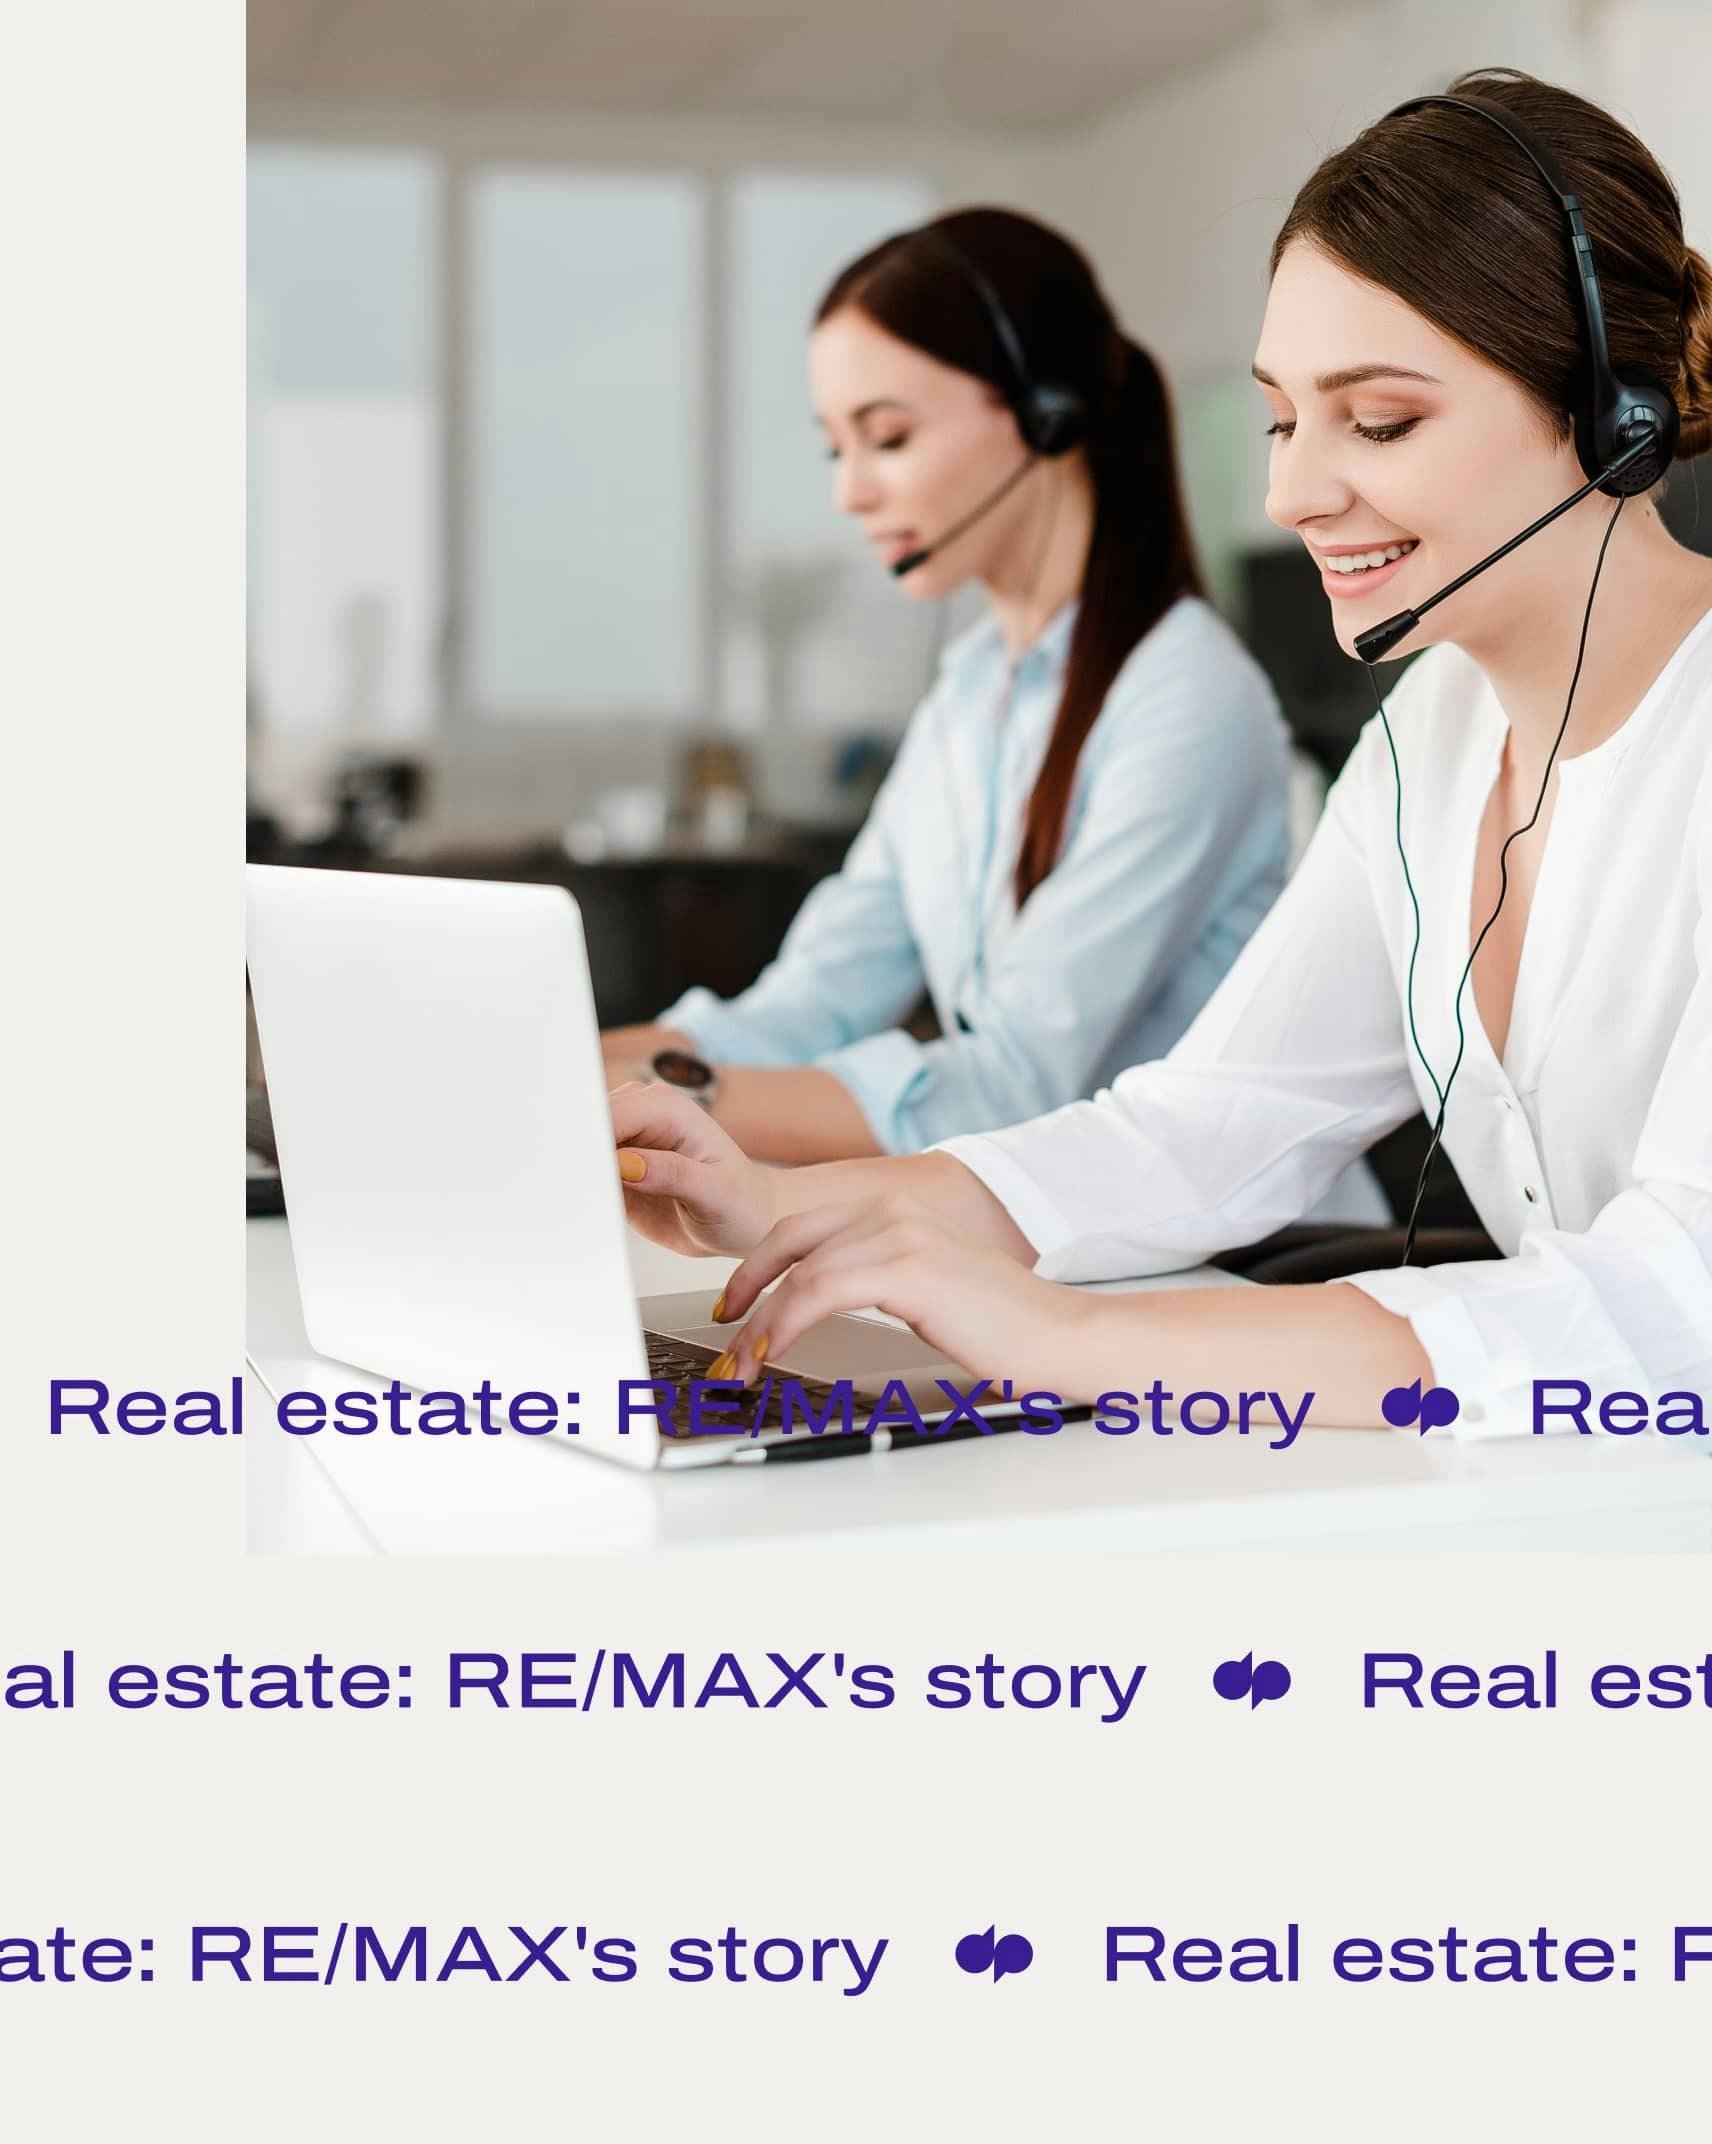 Real estate Remax story